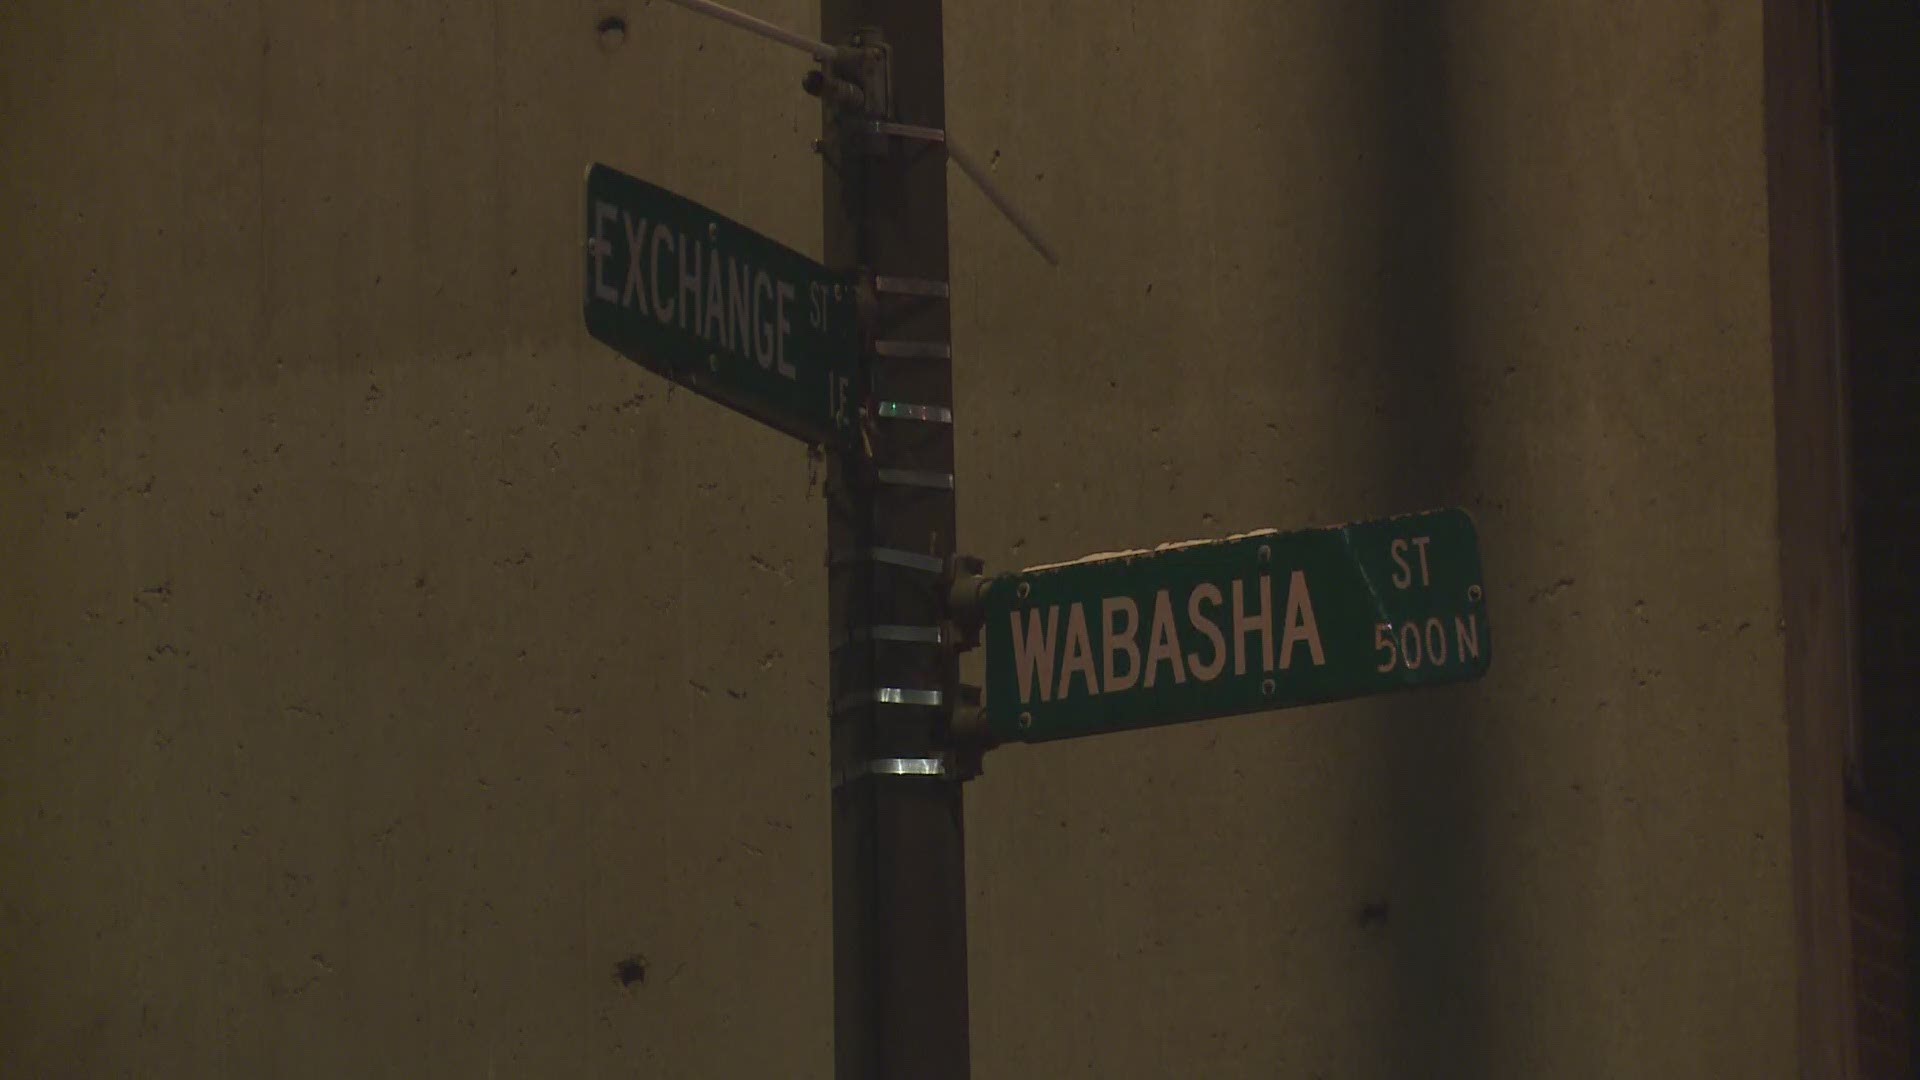 Officials say they responded to the 500 block of Wabasha St. around 7 p.m. Monday and found an adult male unconscious and not breathing.